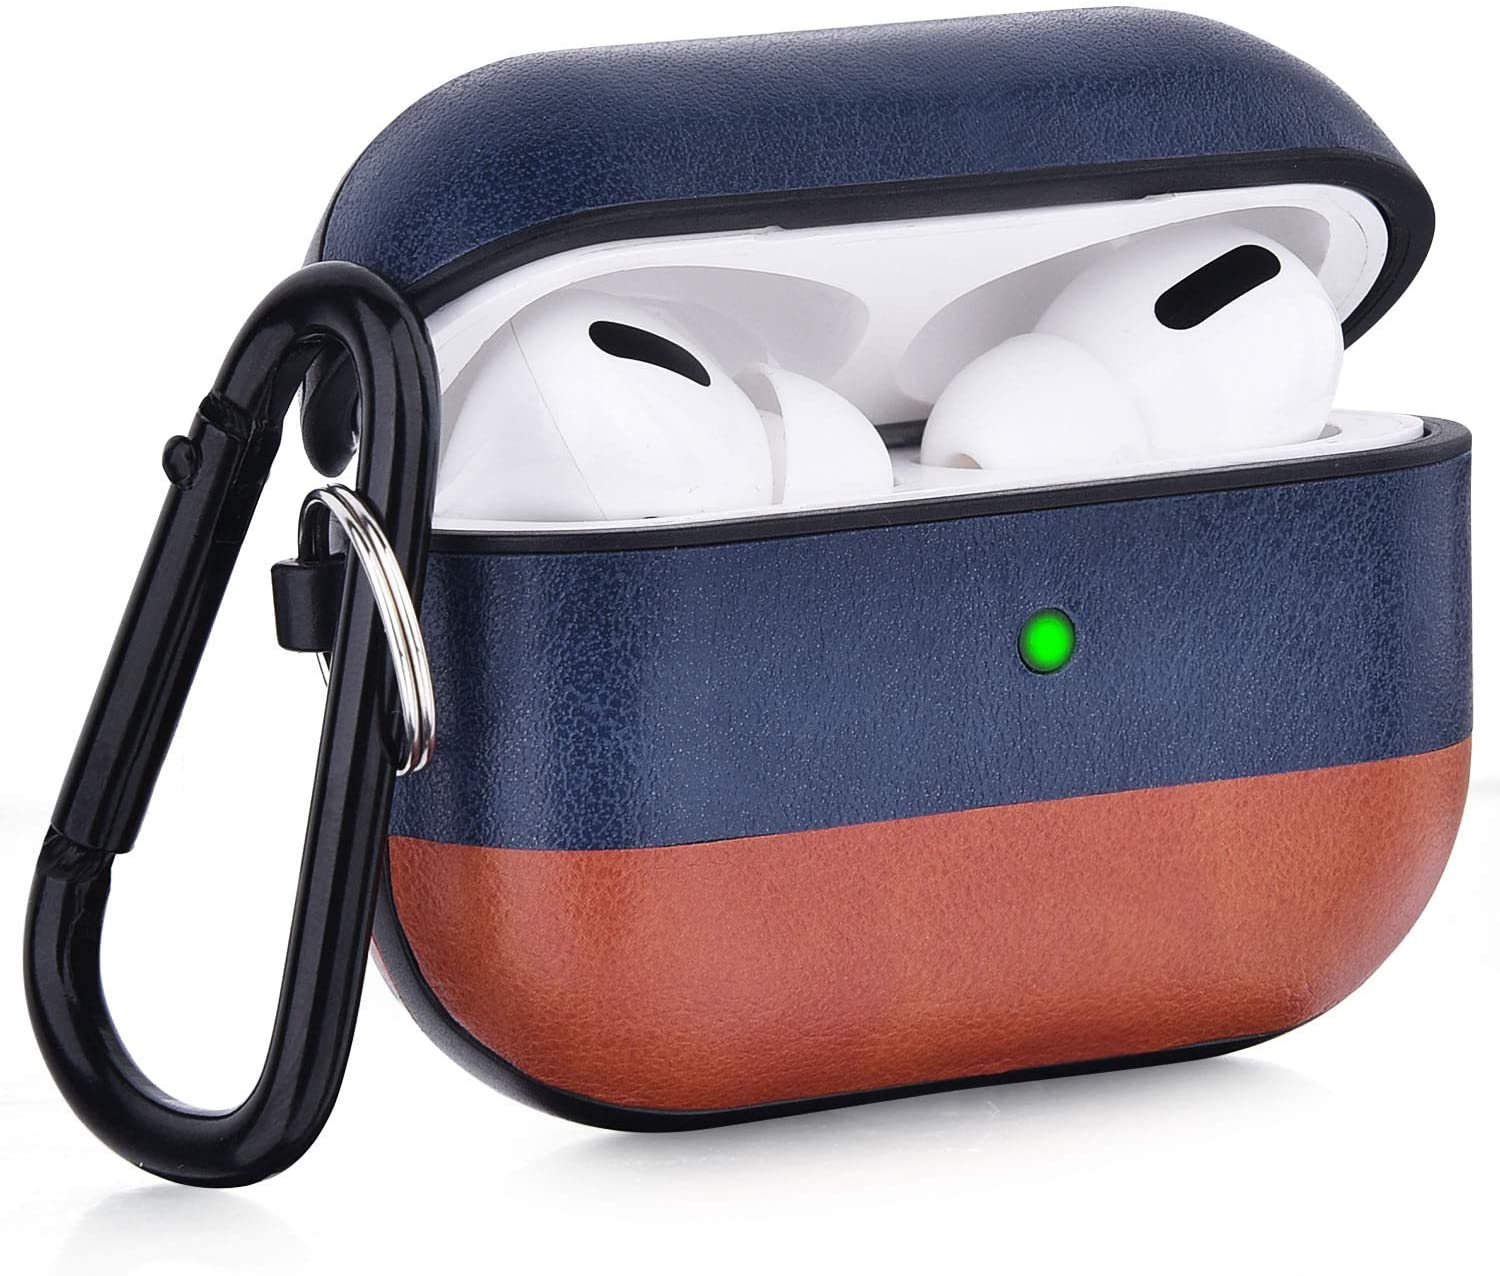 Airpods Pro Case Genuine Leather Airpod 3 Case for Airpods Pro [Front LED Visible] Protective Cover Skin Brown Men Women